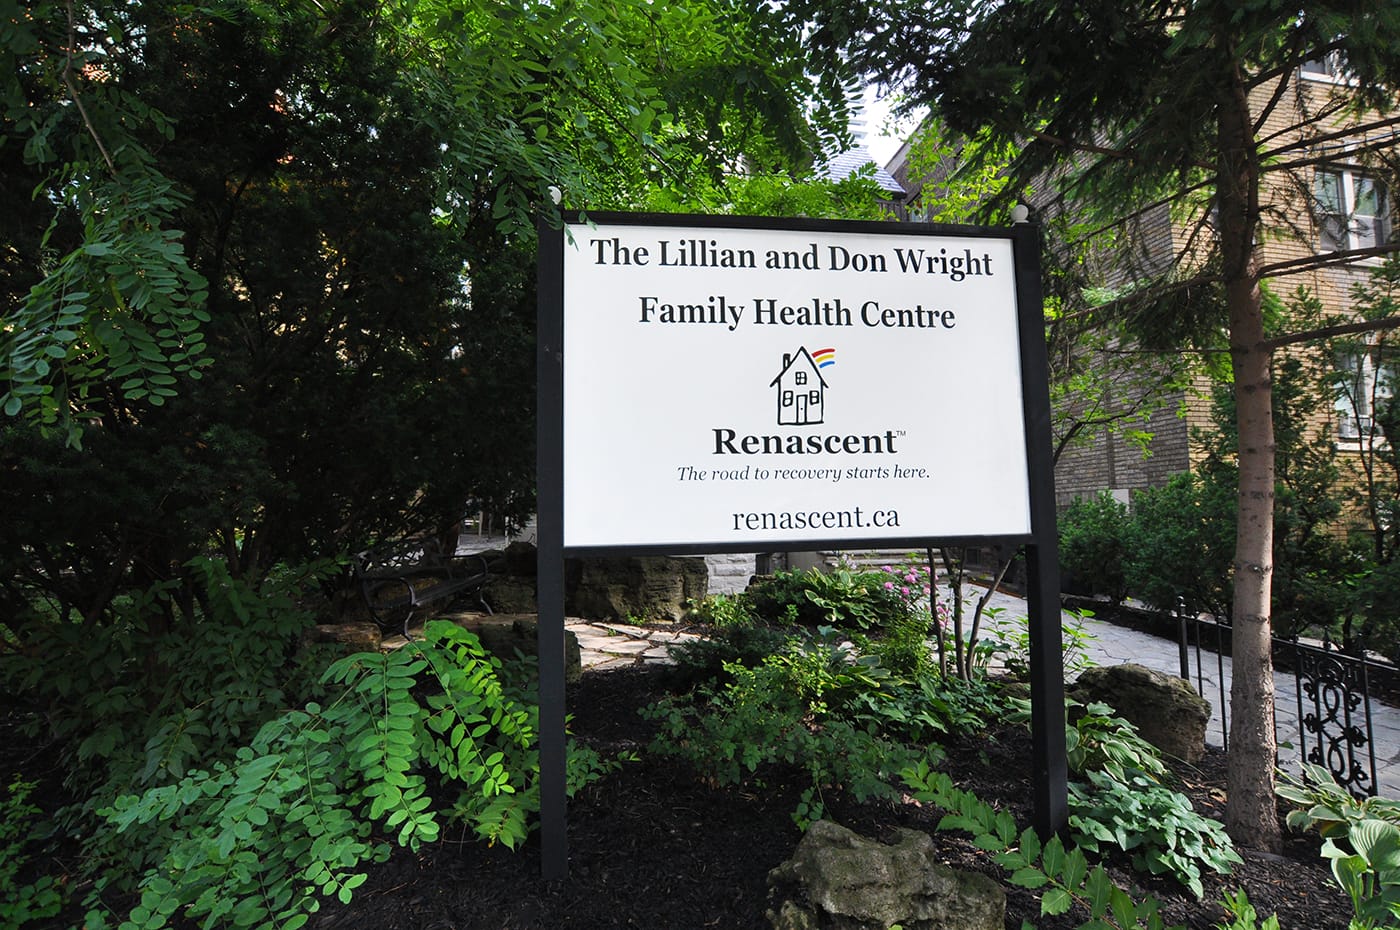 A sign that says "the Lillian and Don Wright Family Health Centre"